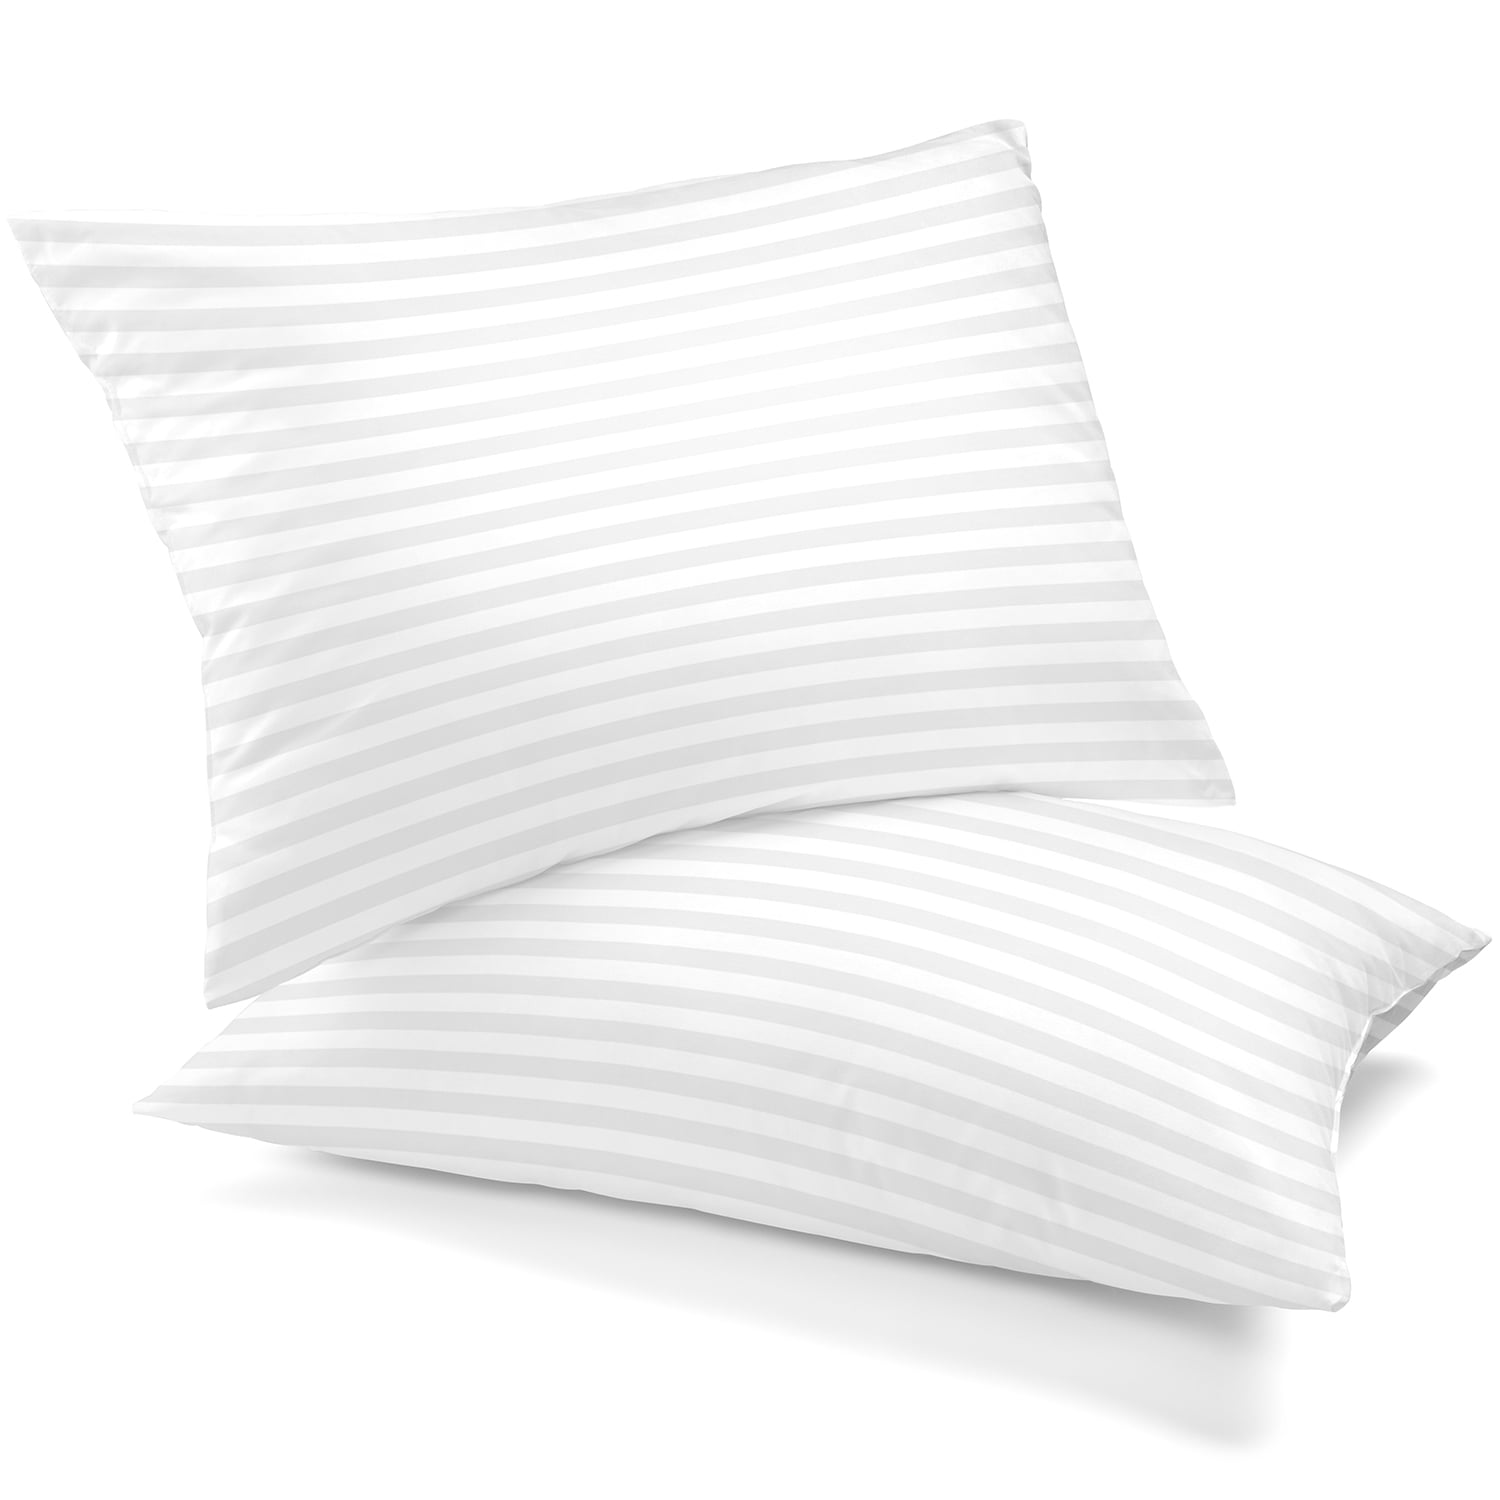 MyPillow MP-SD-MF 18.5 x 26 inch Classic Series Bed Pillow for sale online 